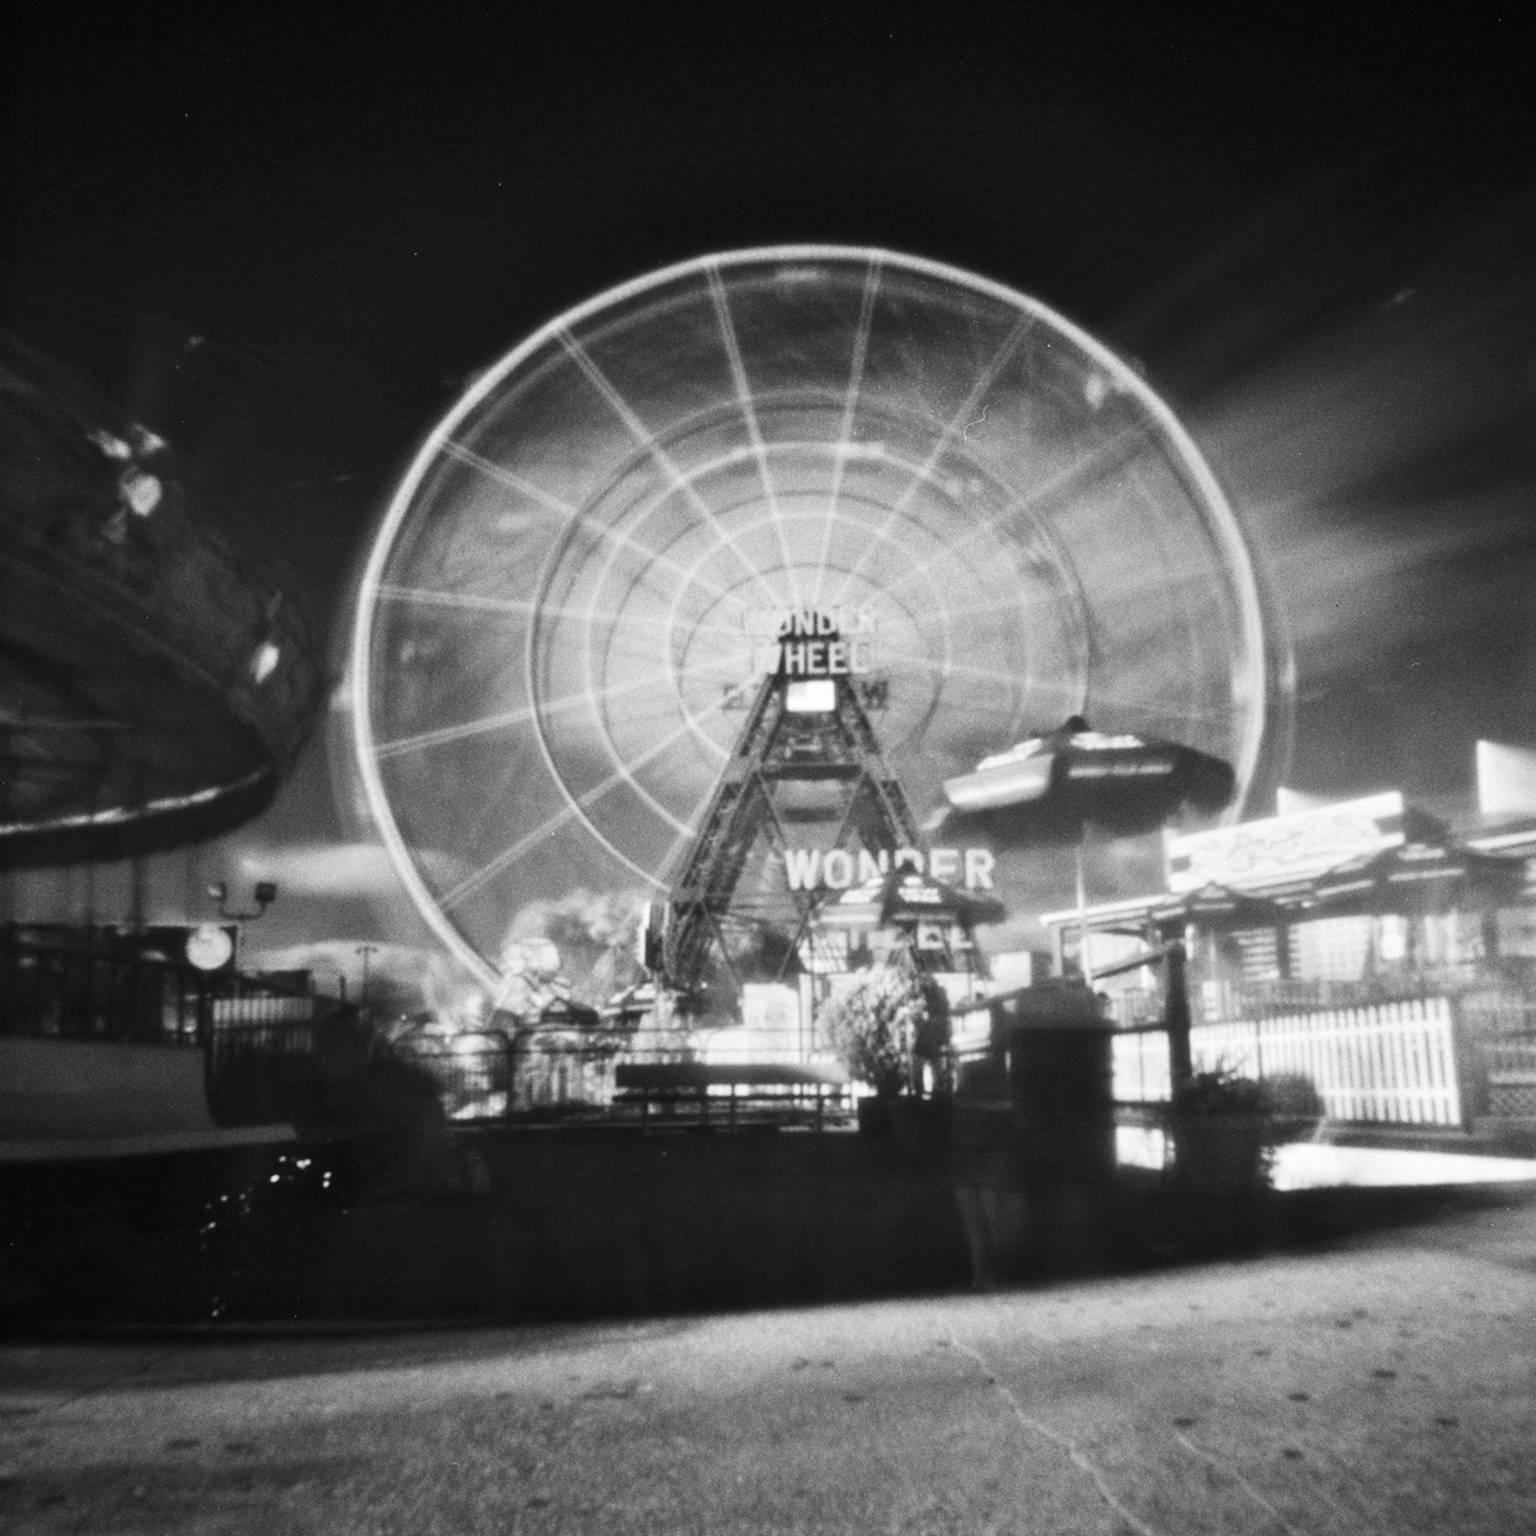 Wonder Wheel - Photograph by Cody S. Brothers